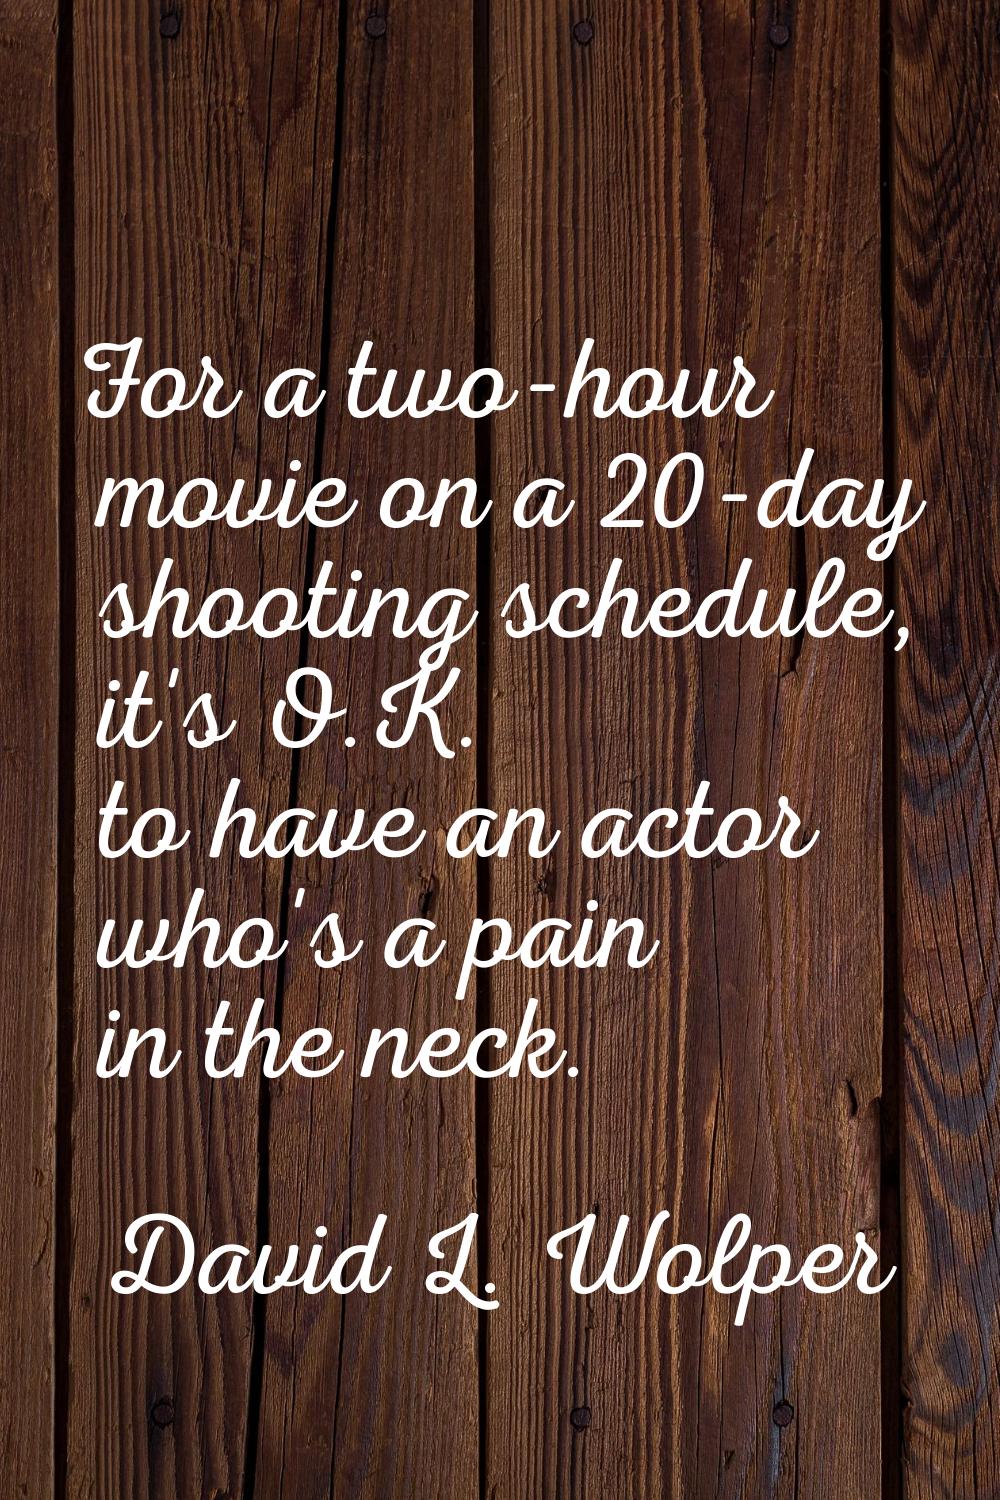 For a two-hour movie on a 20-day shooting schedule, it's O.K. to have an actor who's a pain in the 